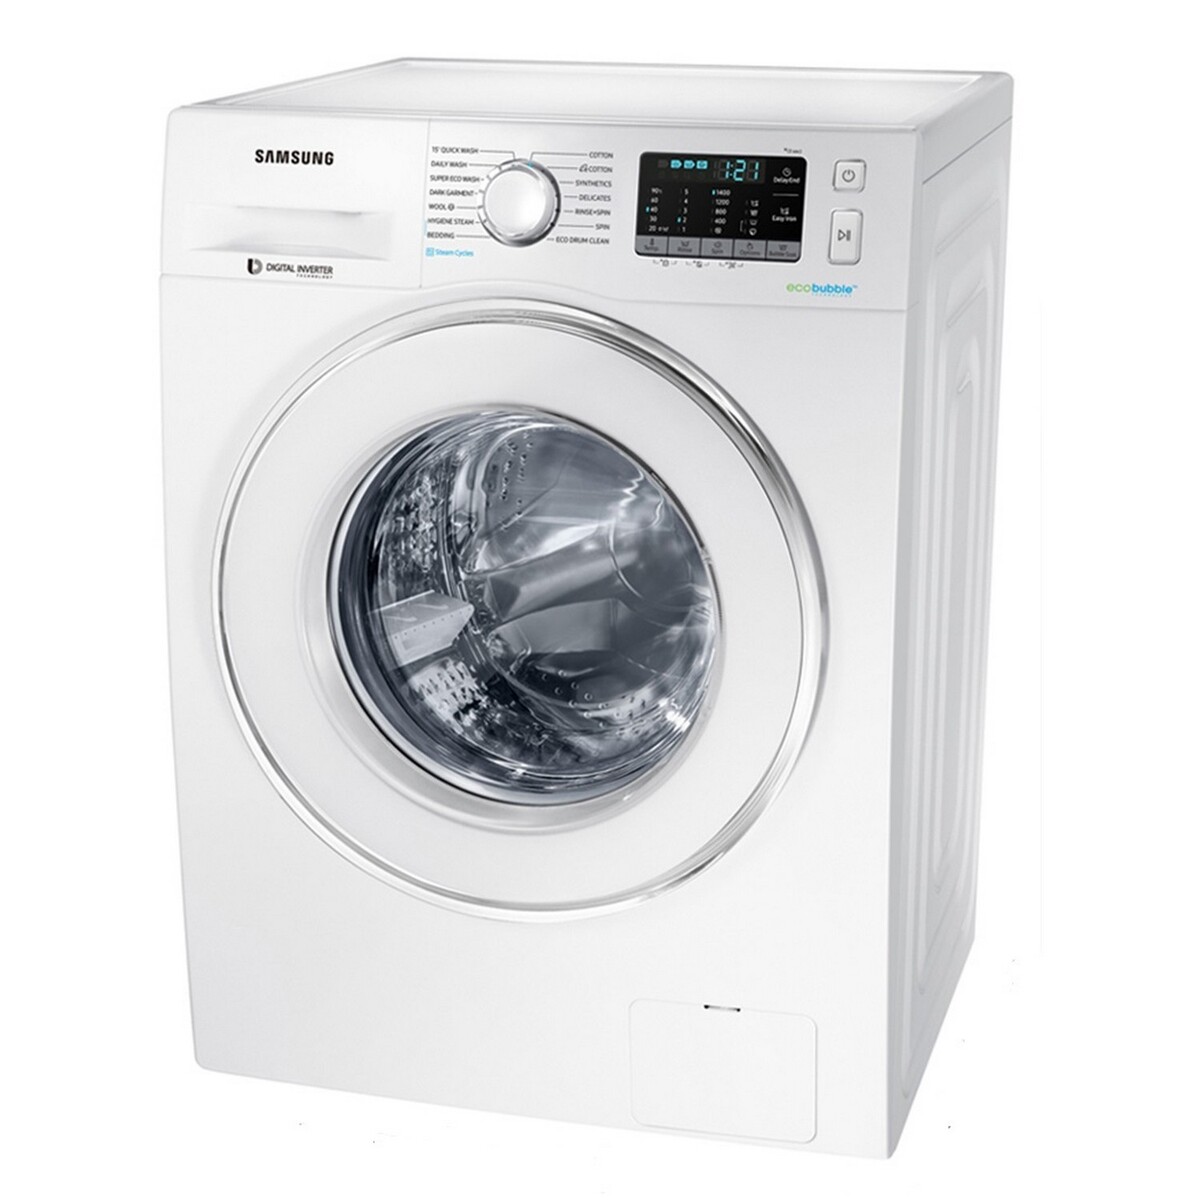 Samsung Fully Automatic Front Load Washing Machine WW81J54E0IW 8Kg